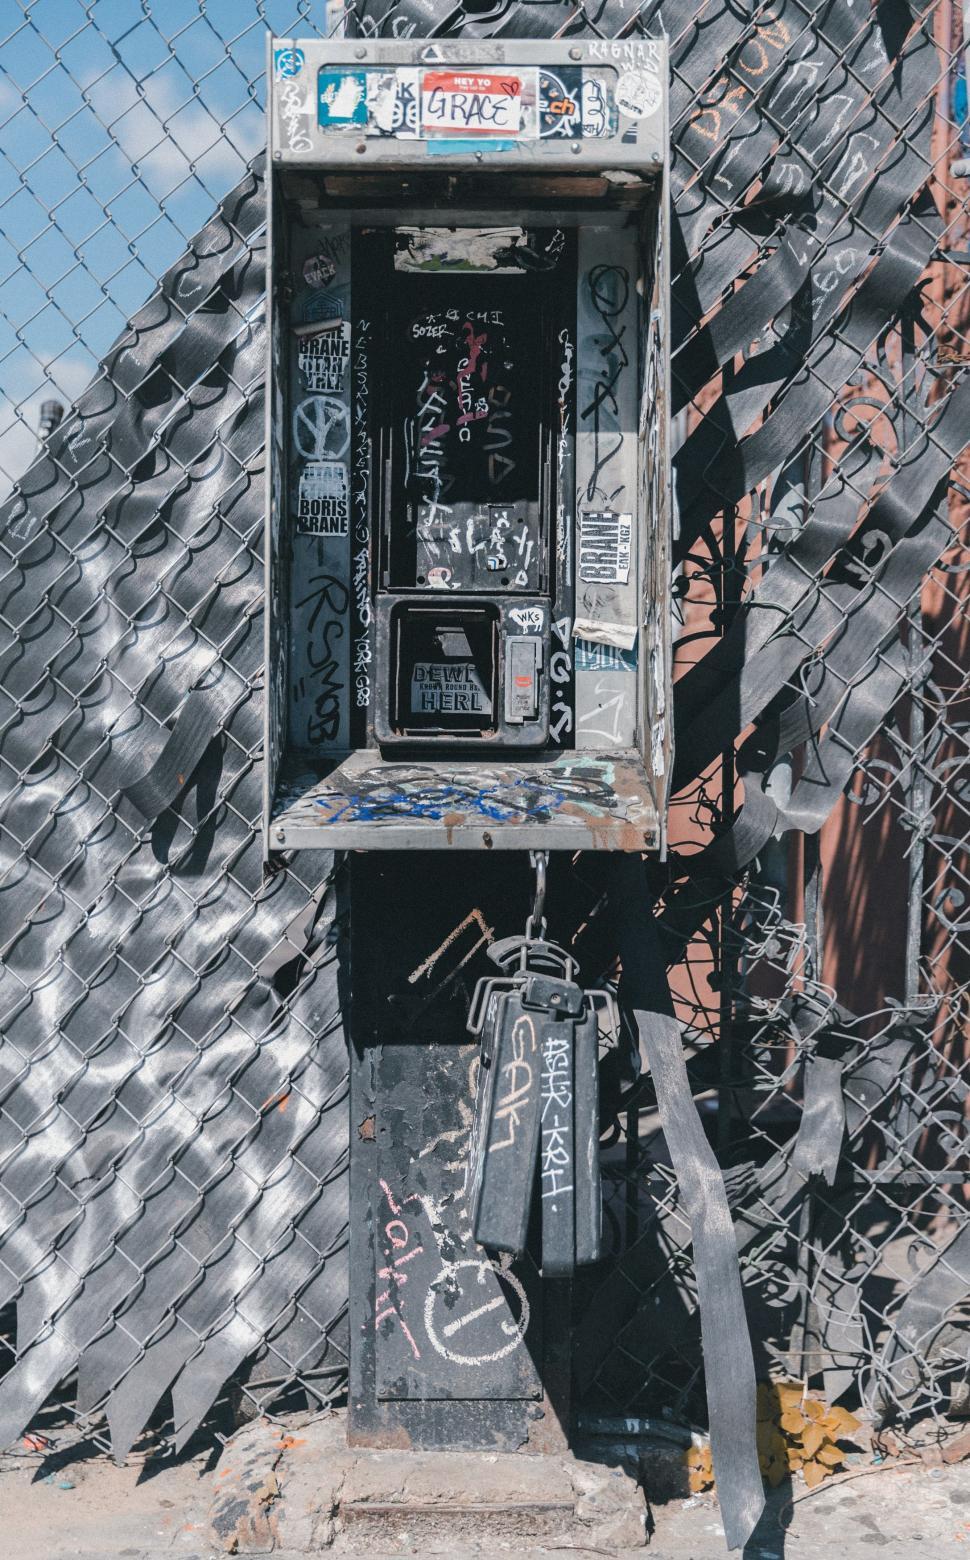 Free Image of Parking Meter Beside Chain Link Fence 